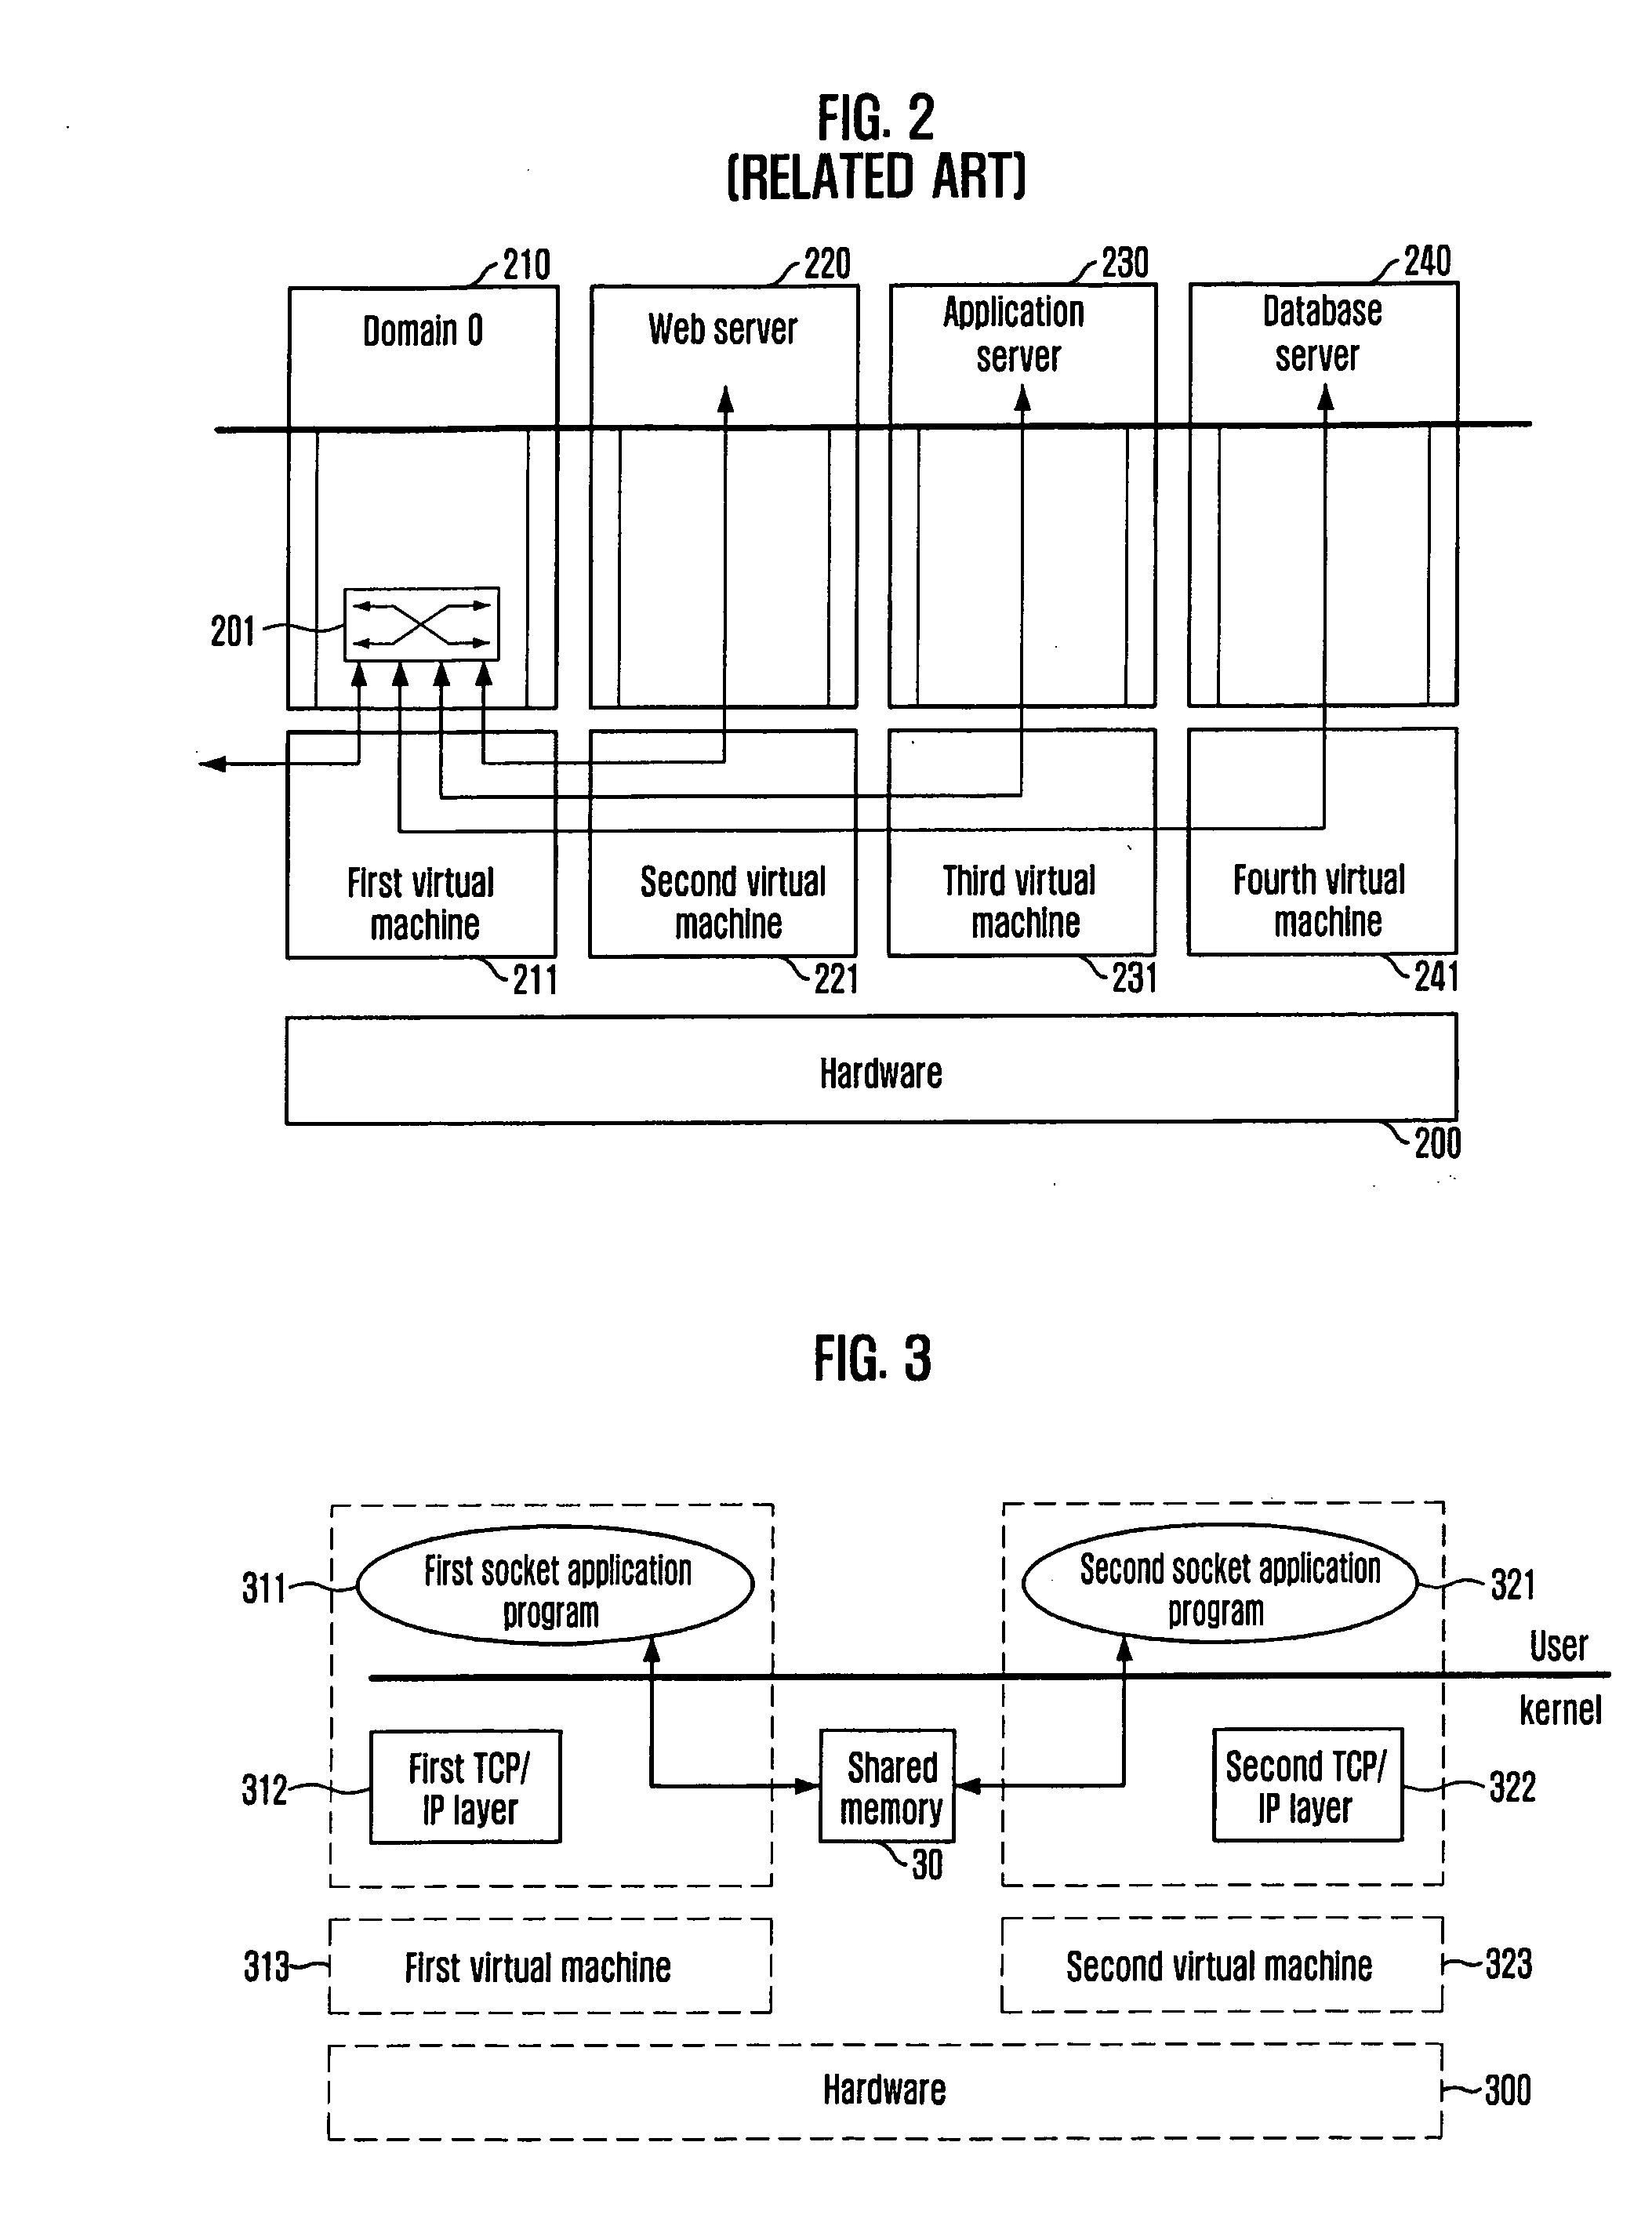 Apparatus and method for communication interface between application programs on virtual machines using shared memory